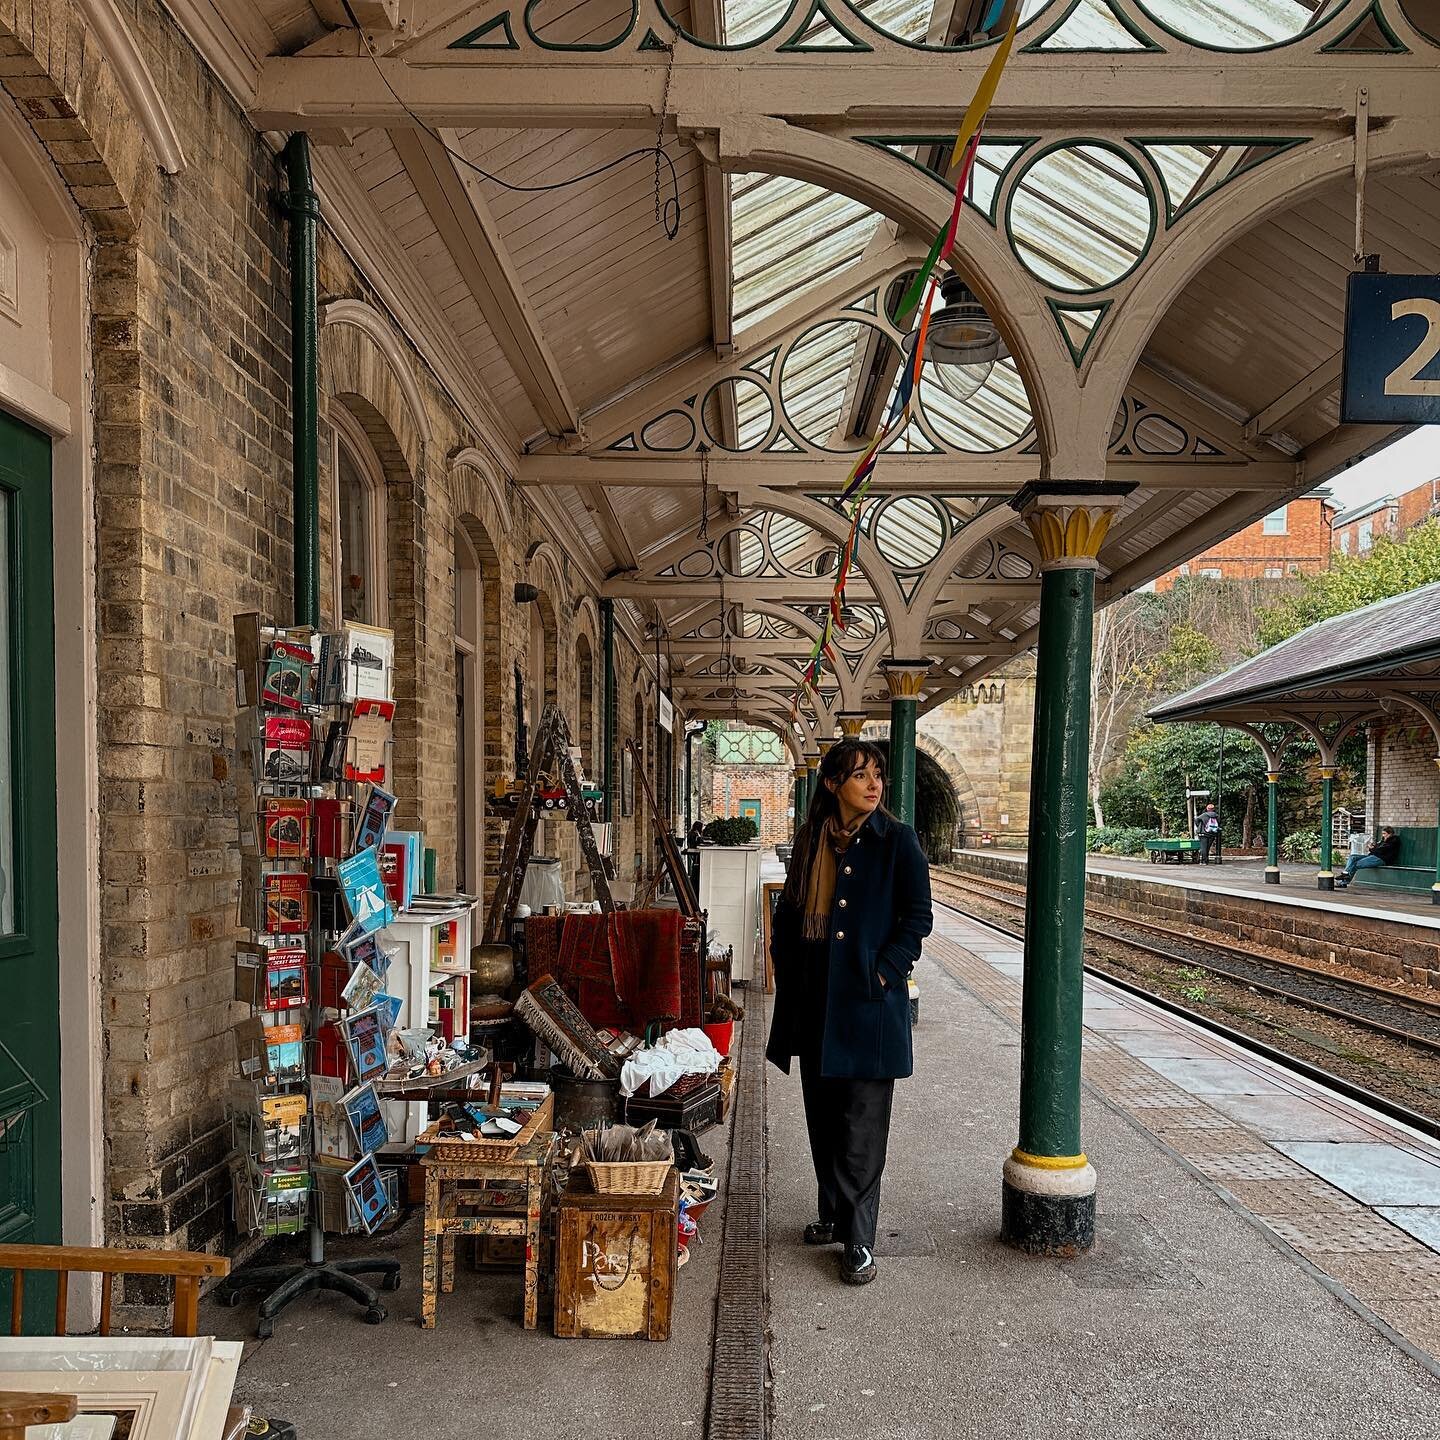 🚂 Knaresborough! The perfect day trip from York. A few pictures from our little adventure with beautiful views, cute vintage shops and of course the most iconic British train station